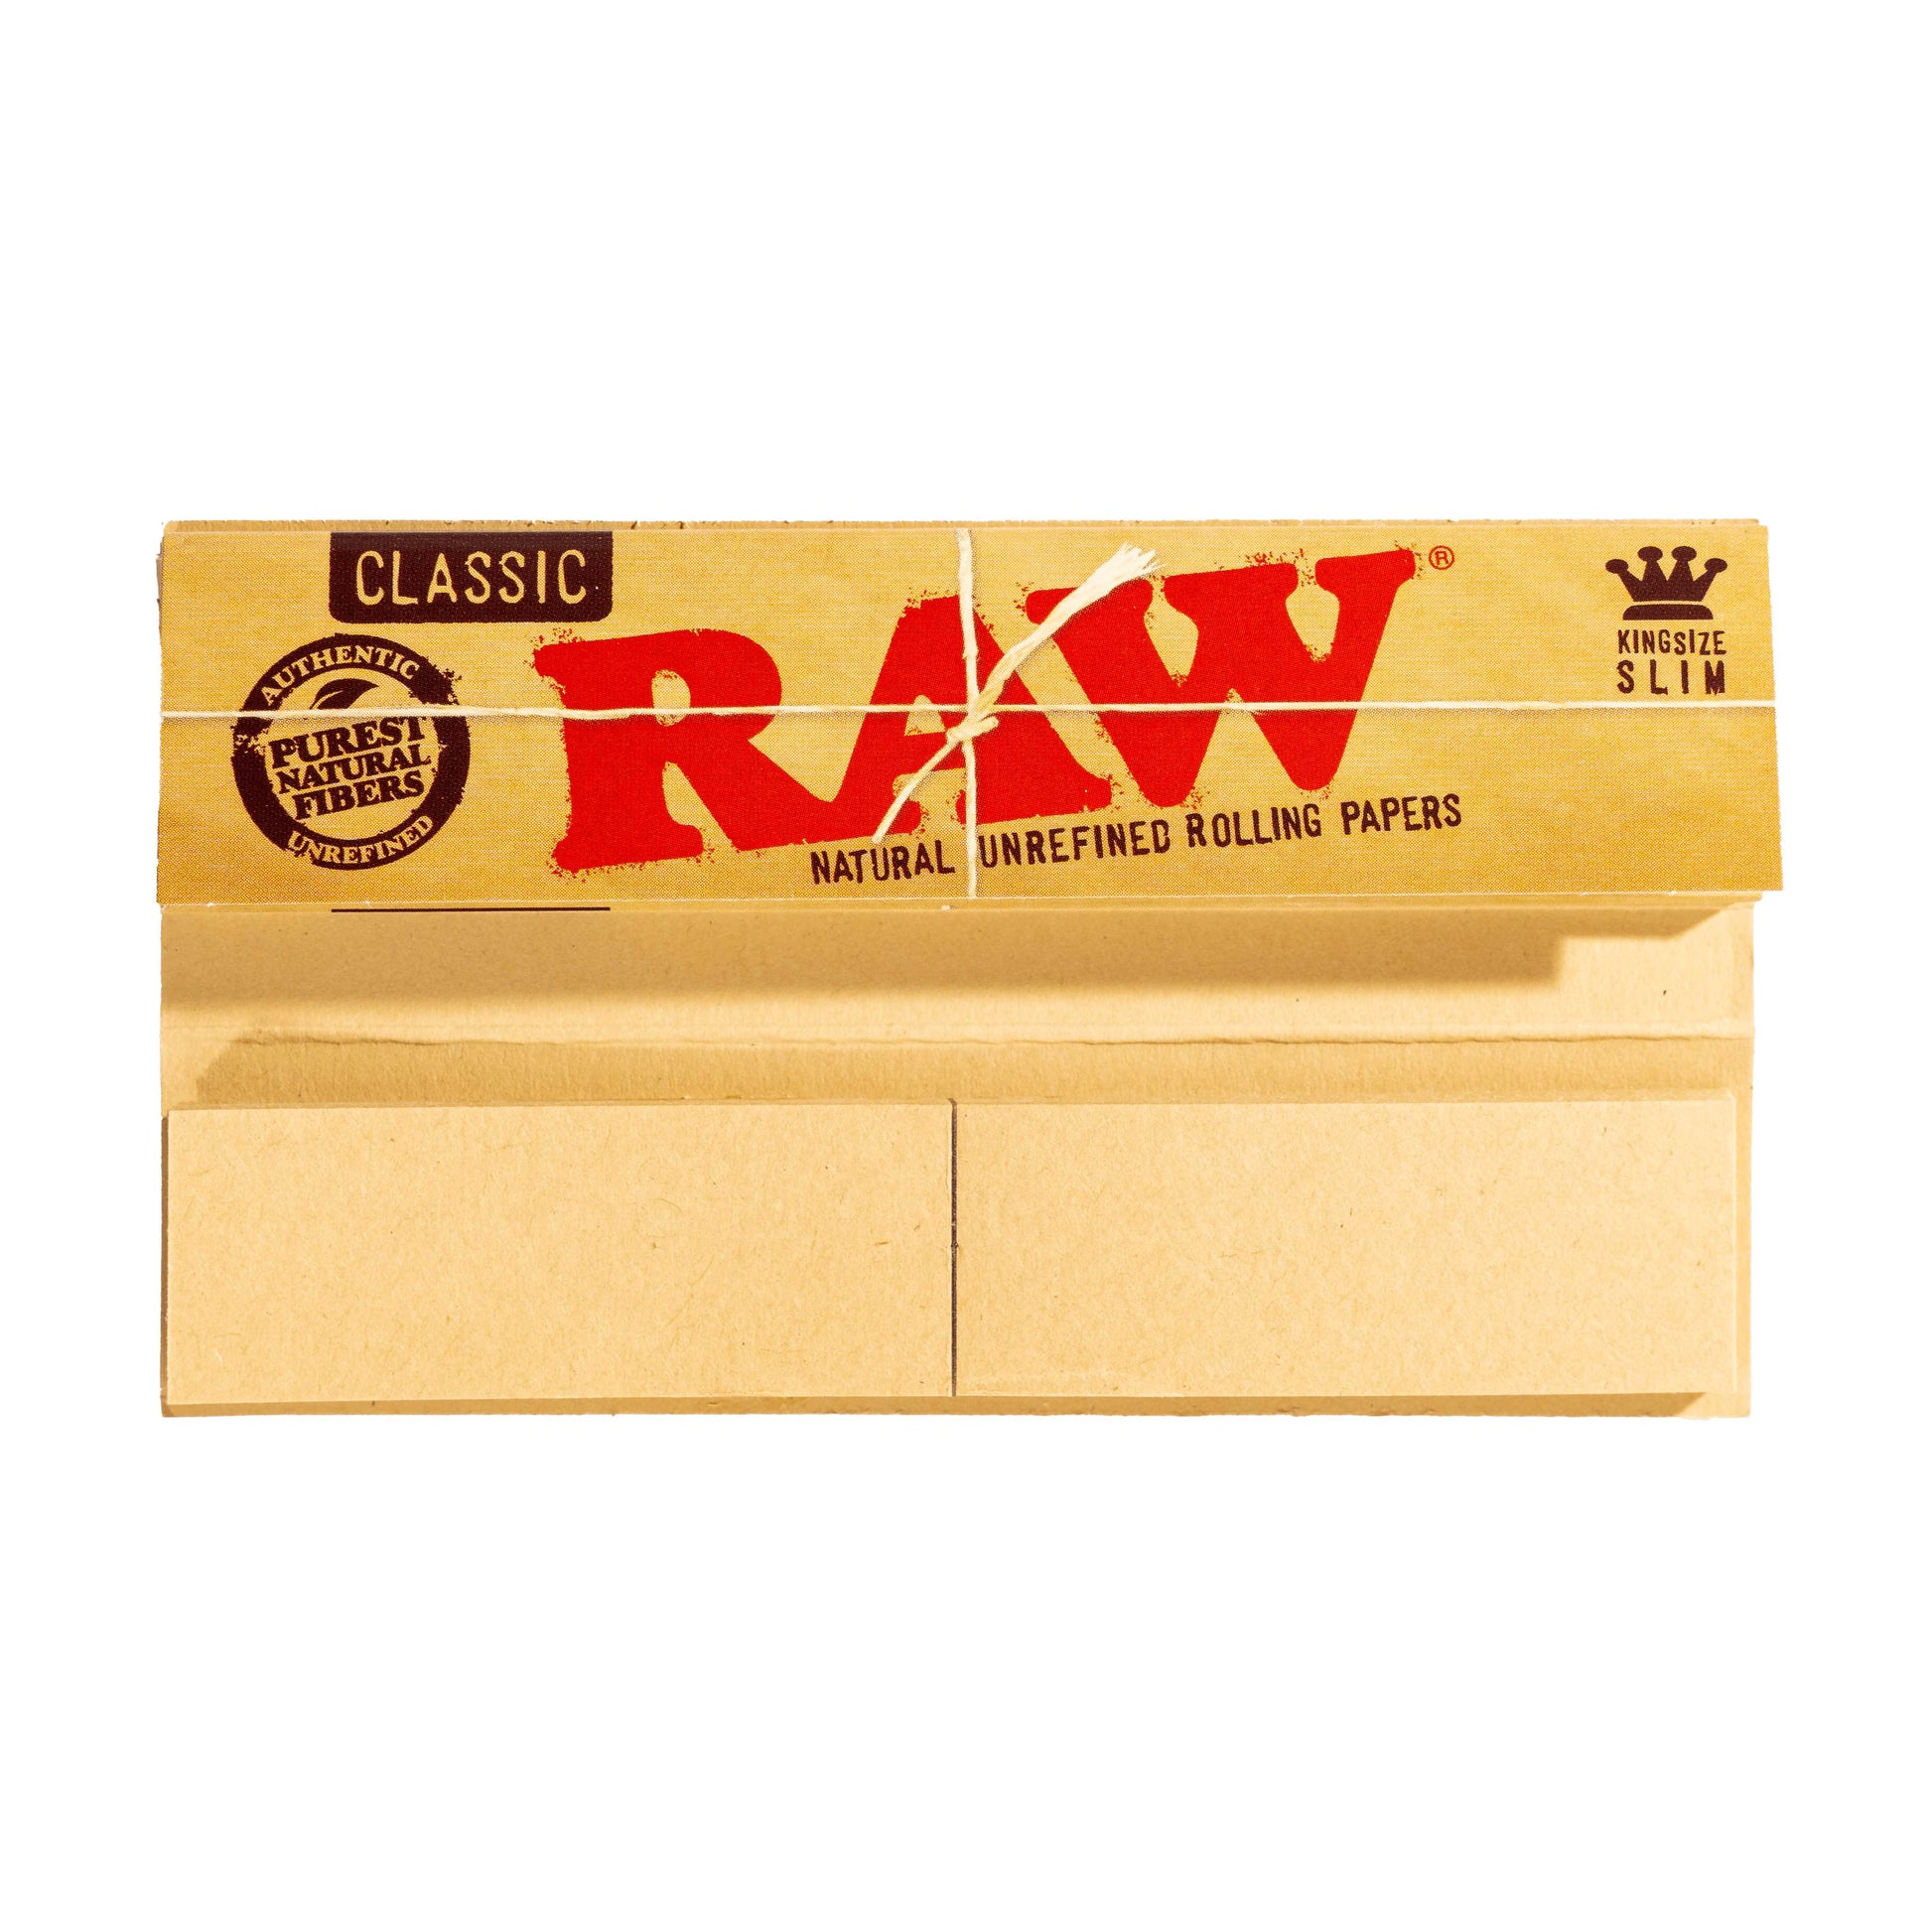 RAW Rolls King Size Smoking Rolling Paper Roll Rips Natural Classic 3 METER  NEW